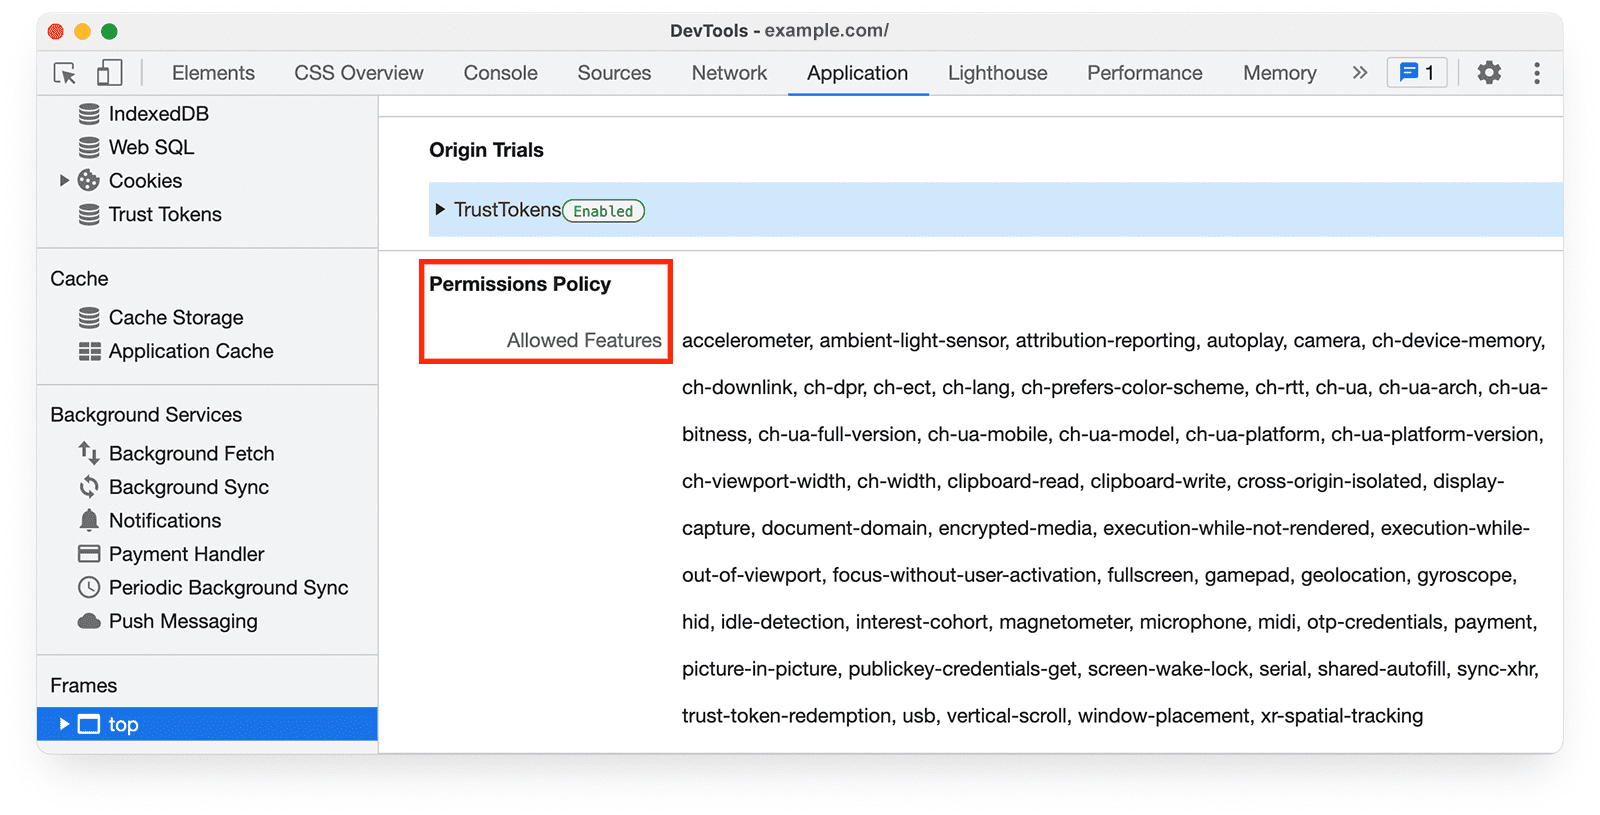 Chrome 开发者工具 
  “Application”面板，显示了“Permissions Policy Allowed Feature”。